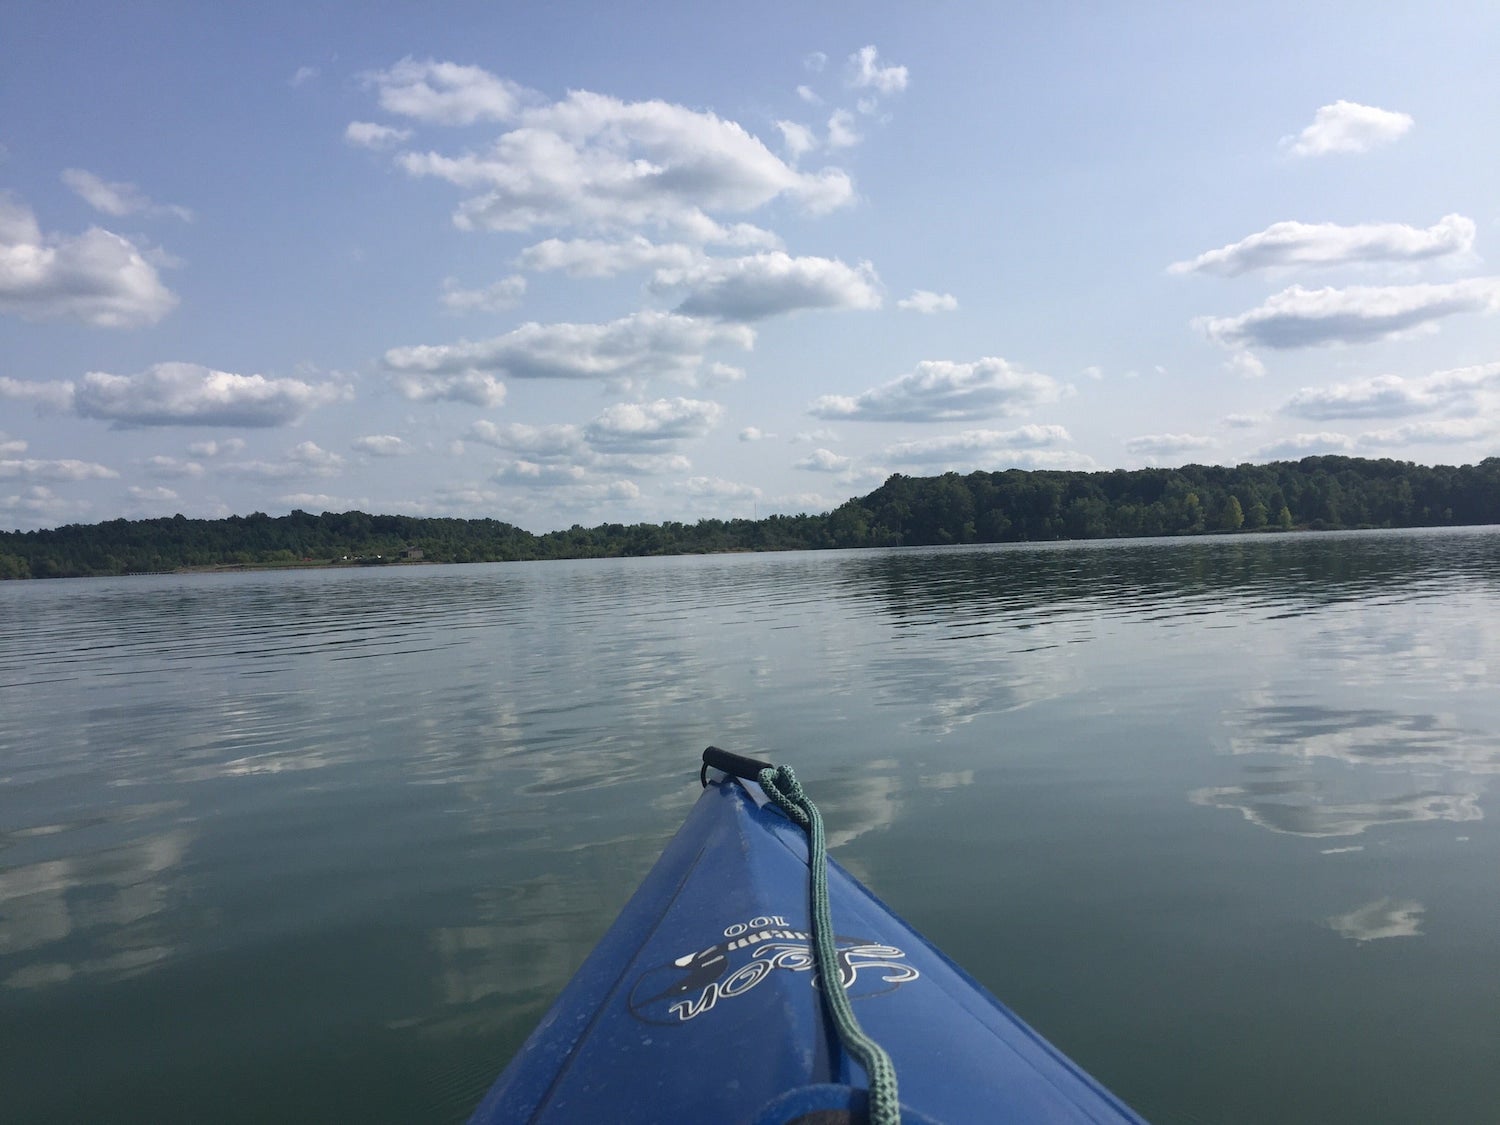 kayak on the water